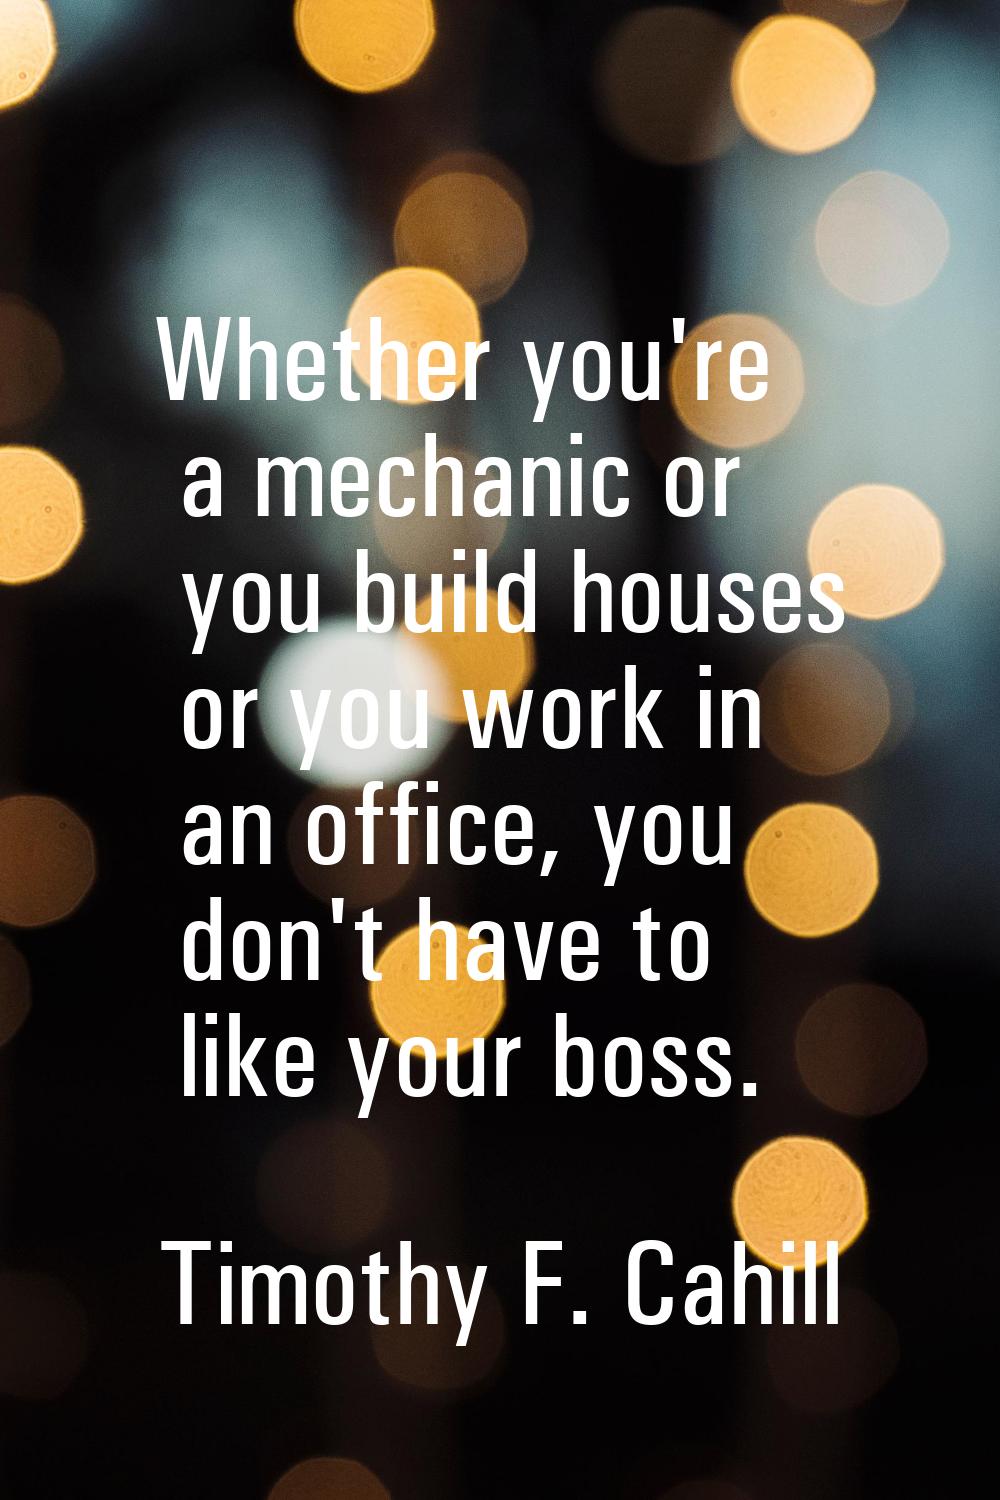 Whether you're a mechanic or you build houses or you work in an office, you don't have to like your